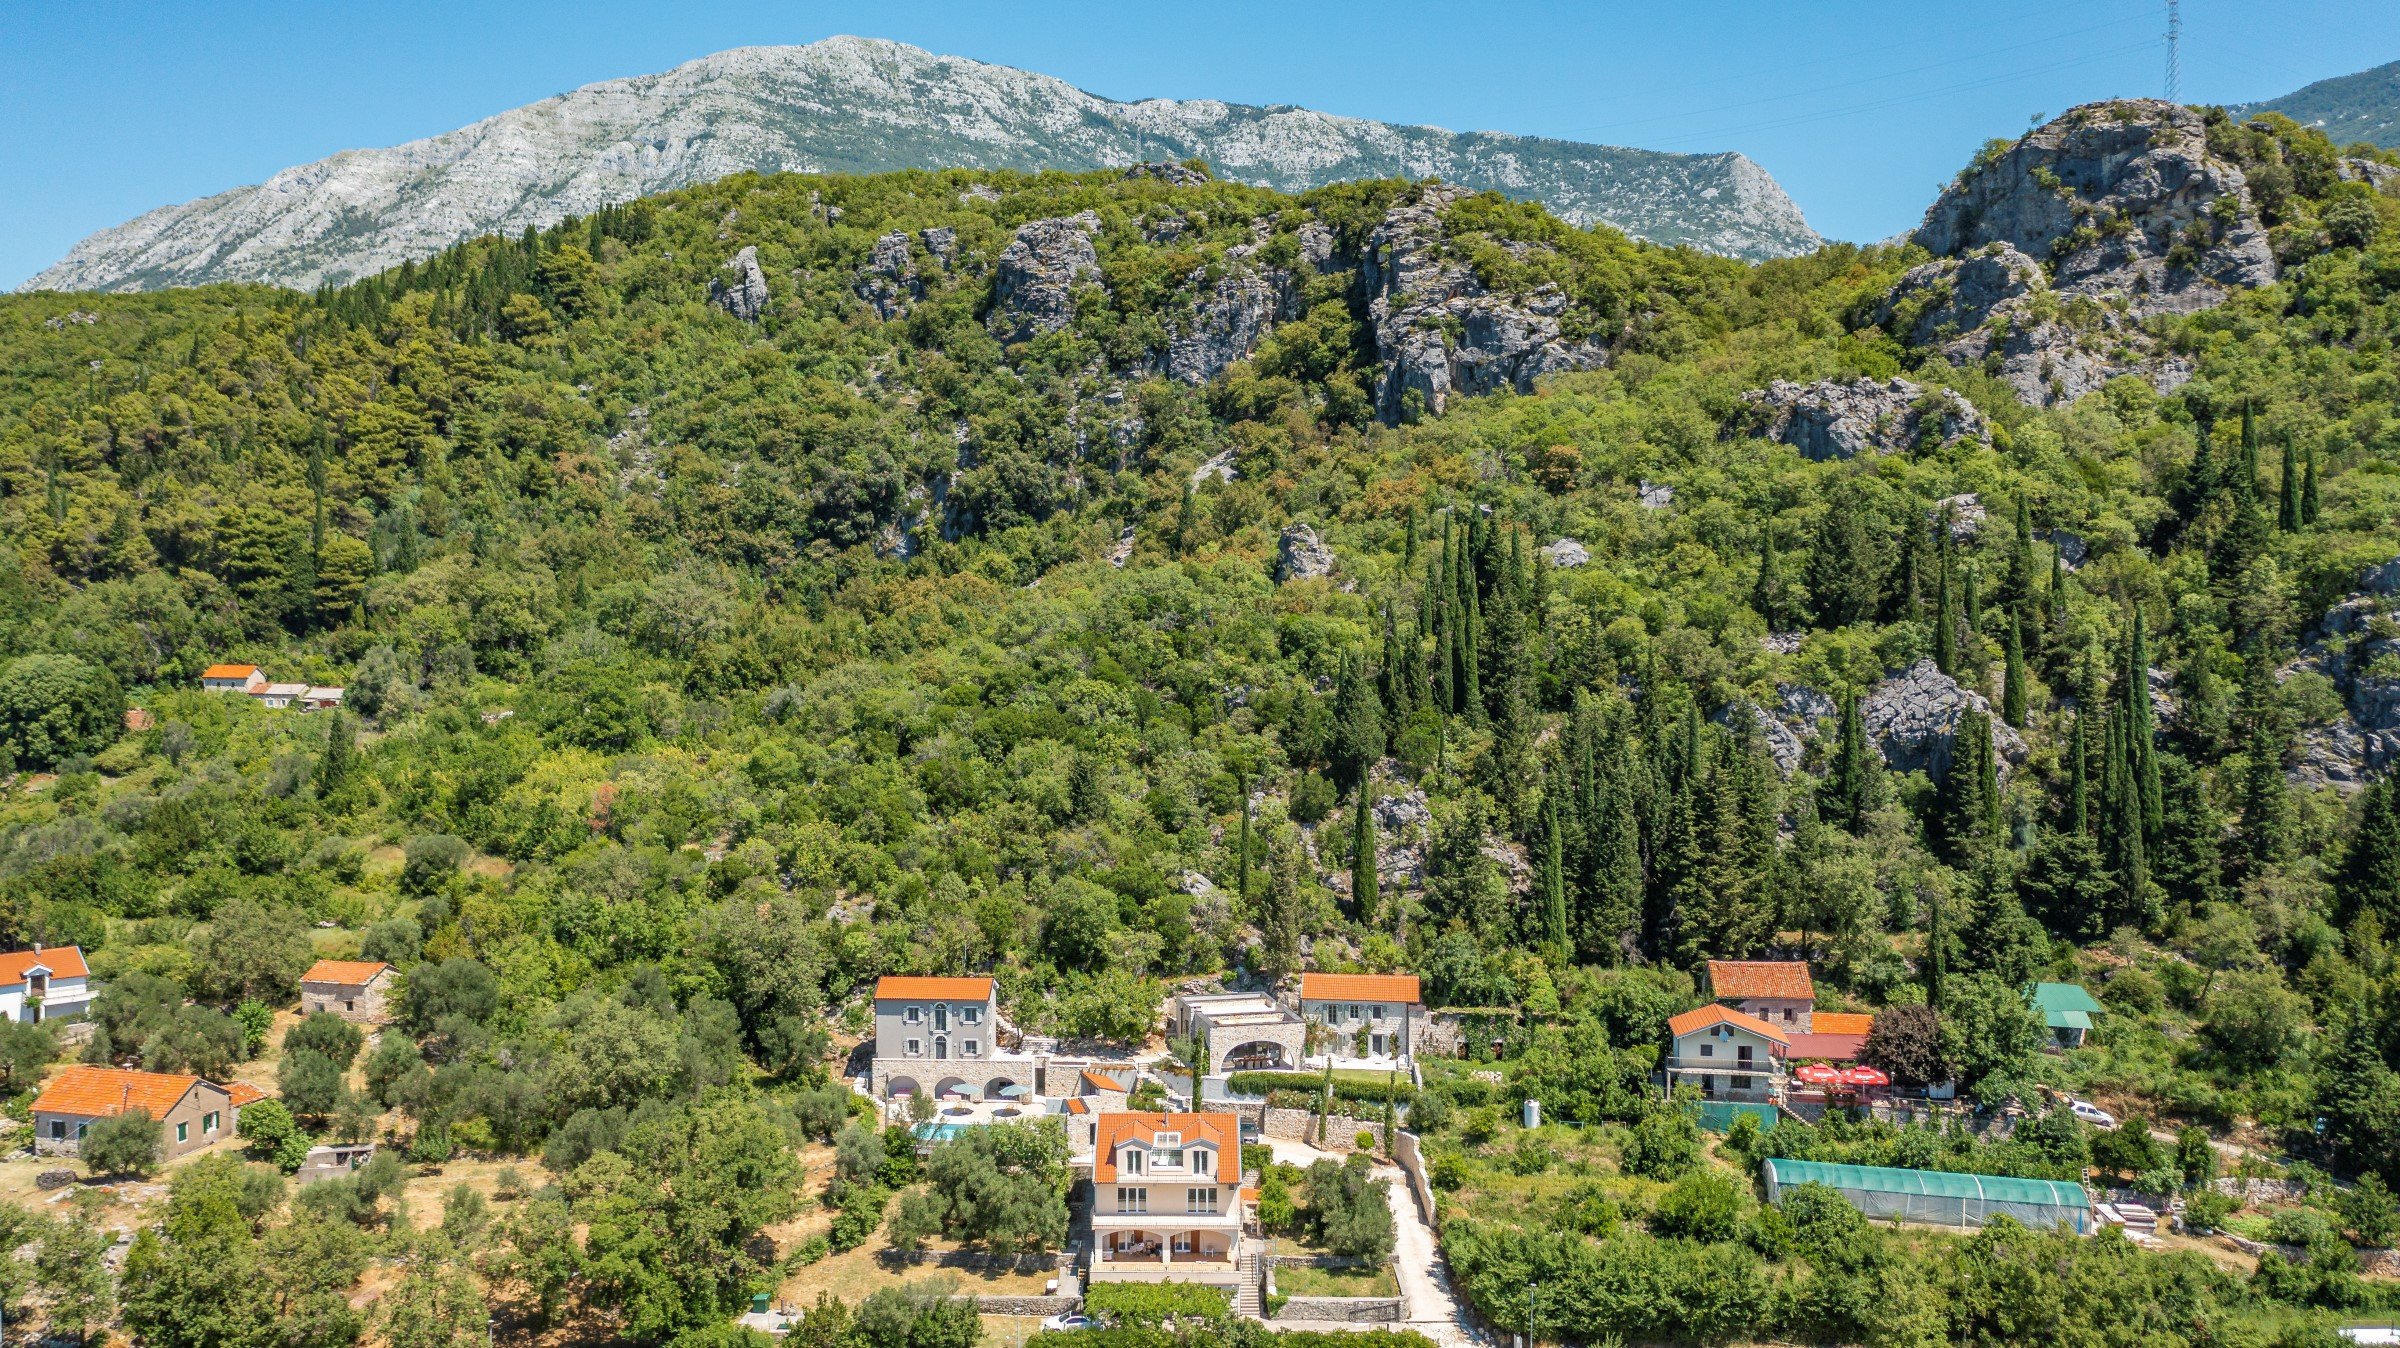 Francis York The Trebesin Boutique Resort Luxury Turnkey Property For Sale in Montenegro 7.jpg